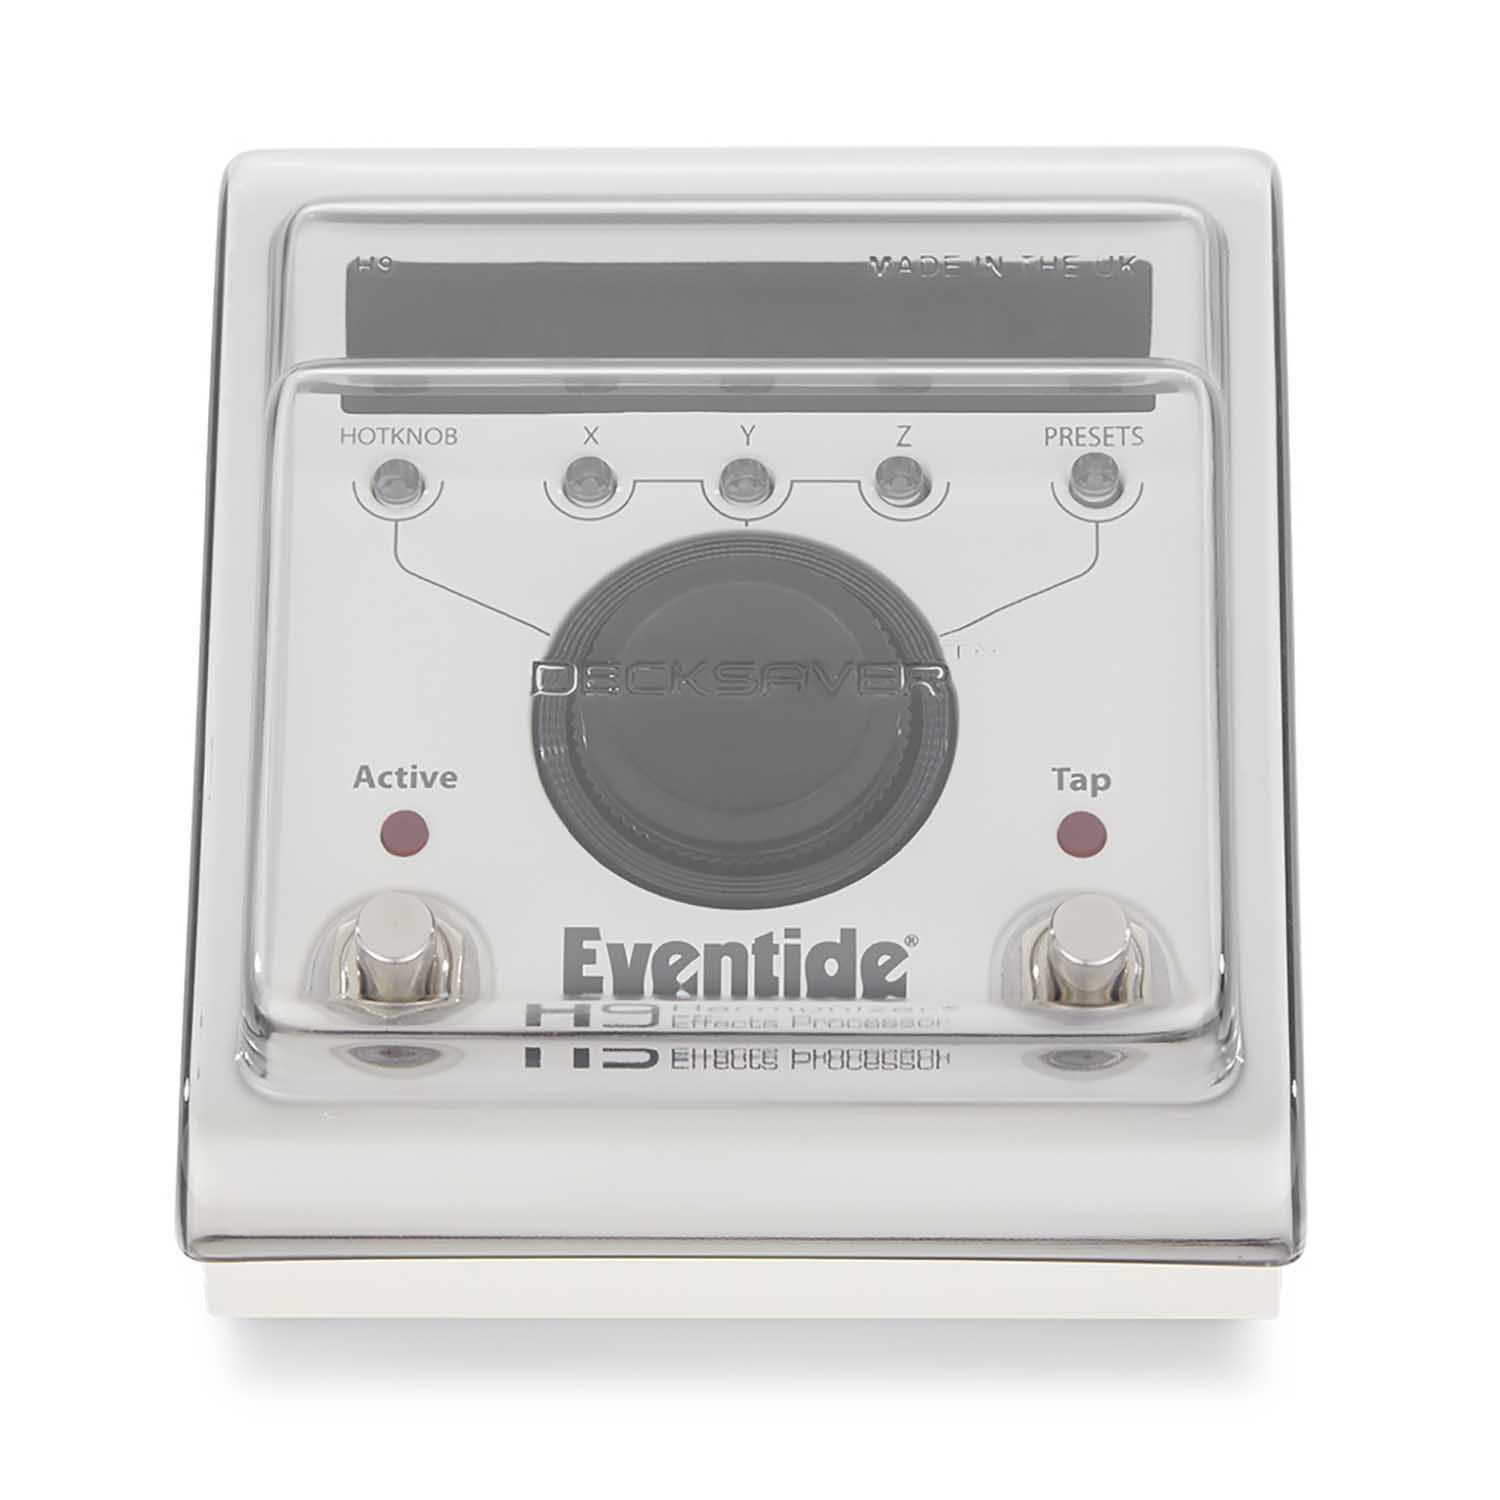 Decksaver DS-PC-ETH9 Protection Cover for Eventide H9 and H9 Max - Hollywood DJ